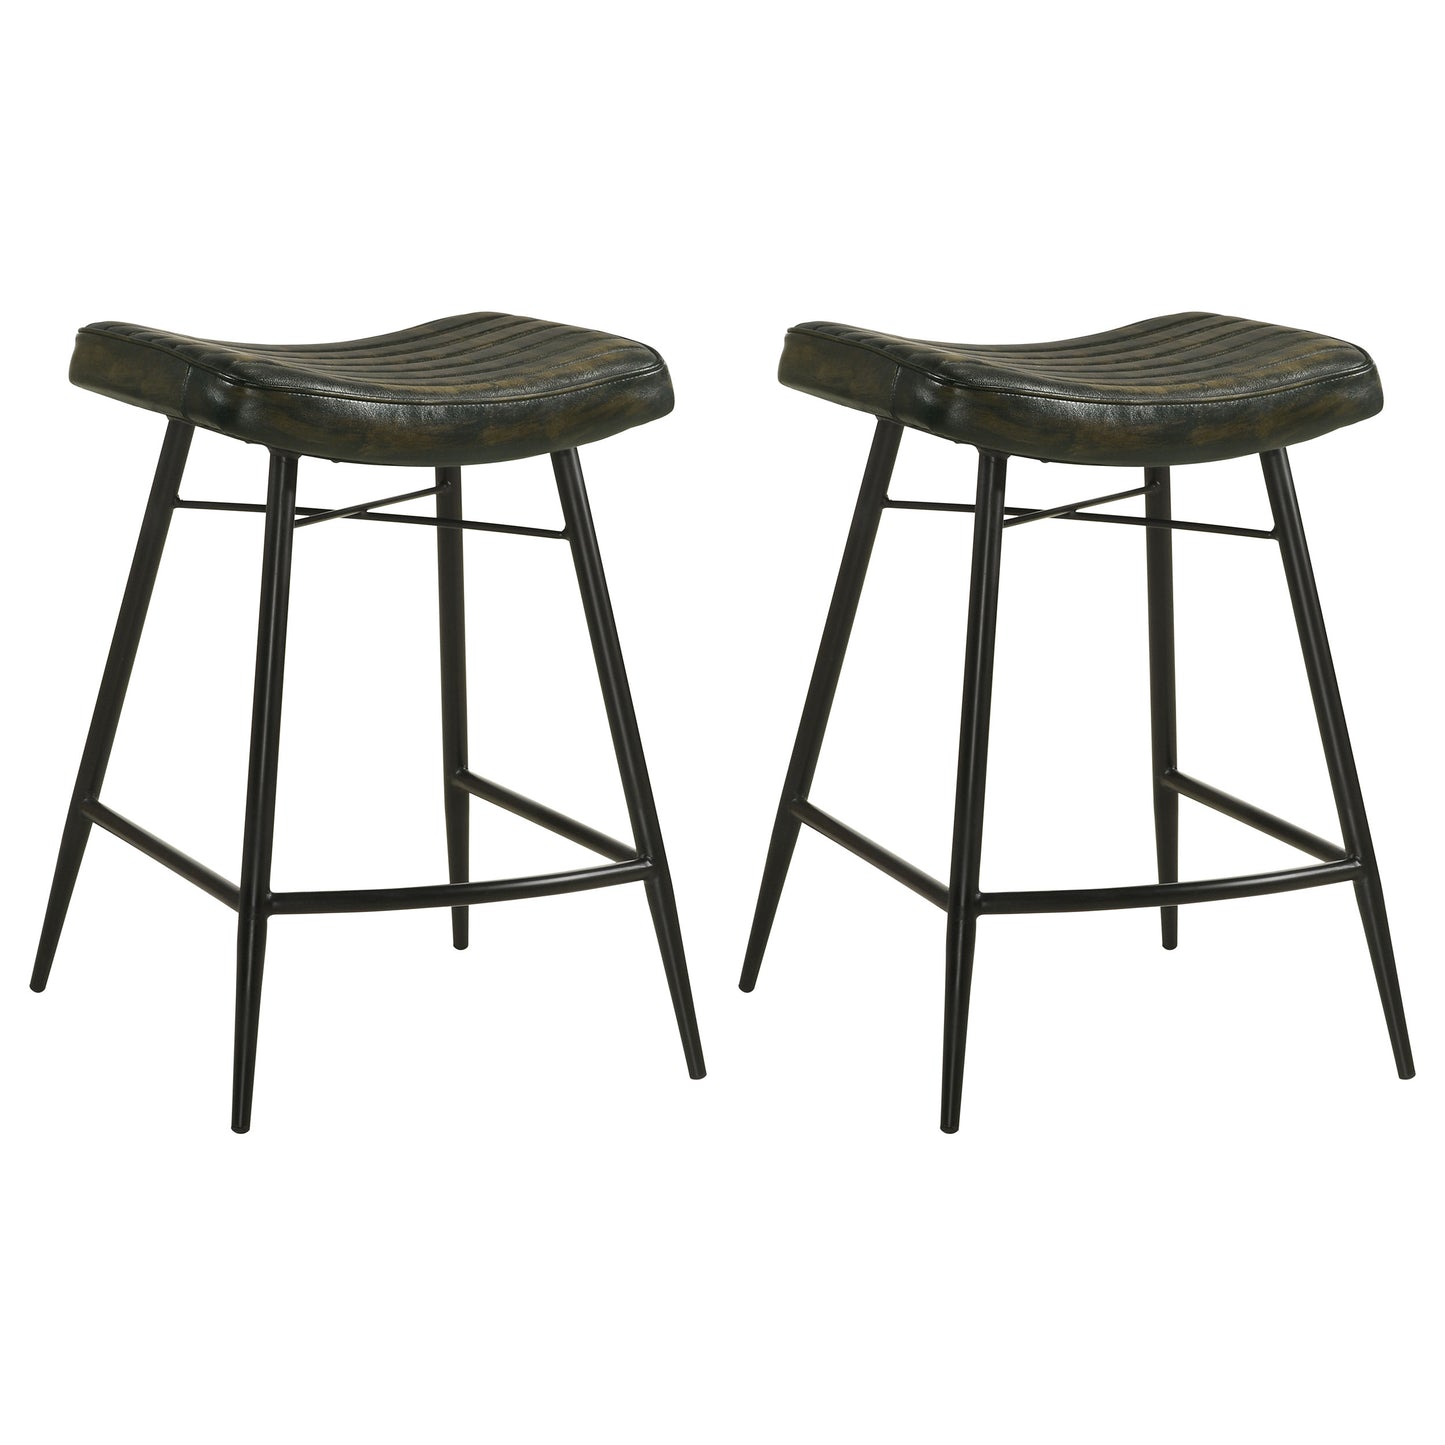 Bayu Leather Upholstered Saddle Seat Backless Counter Height Stool Antique Espresso and Black (Set of 2)